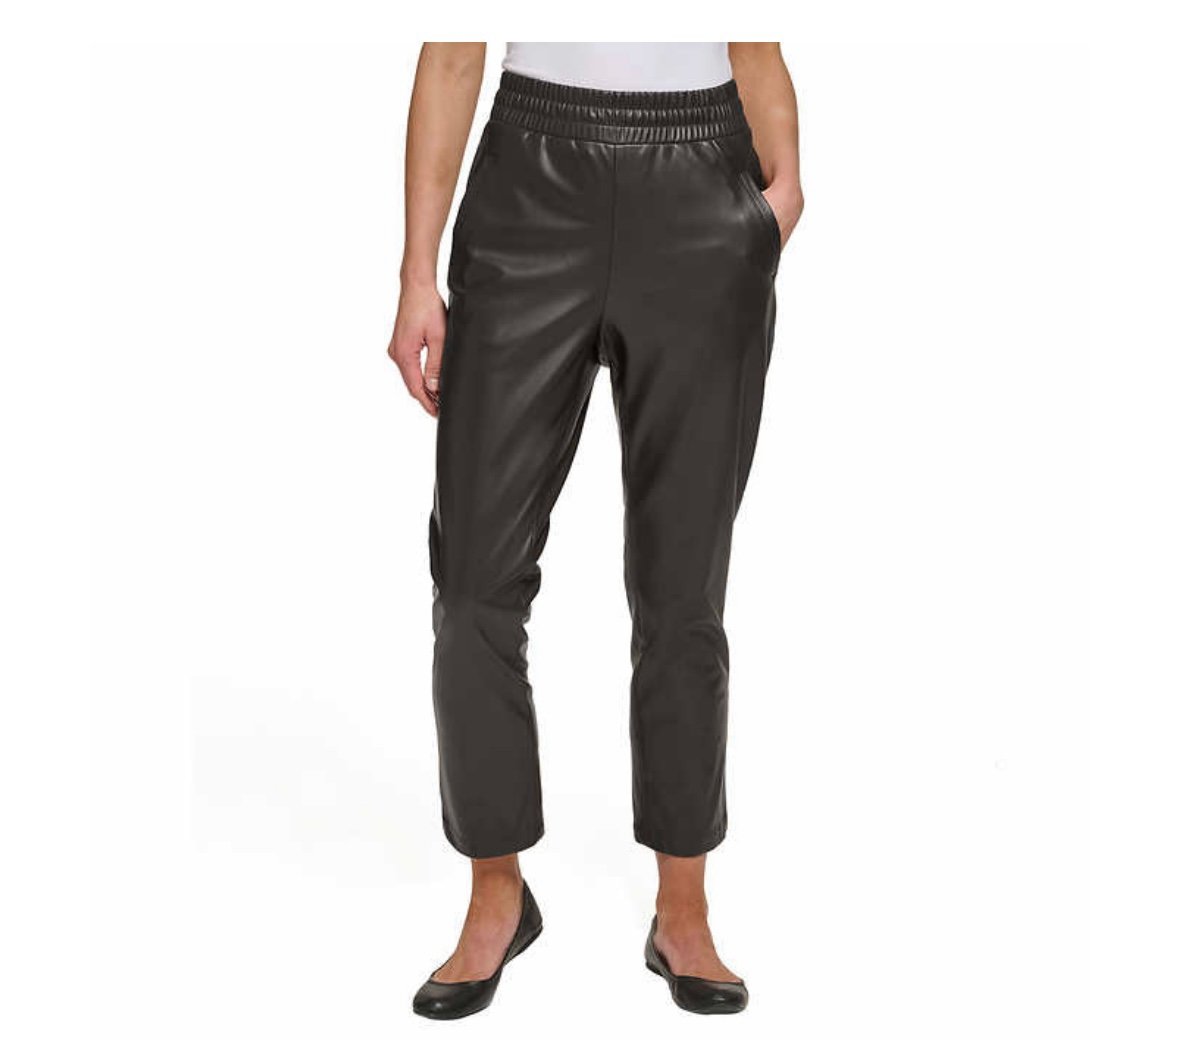 where to buy  DKNY Ladies Faux Leather Pants j89qxt4RB 